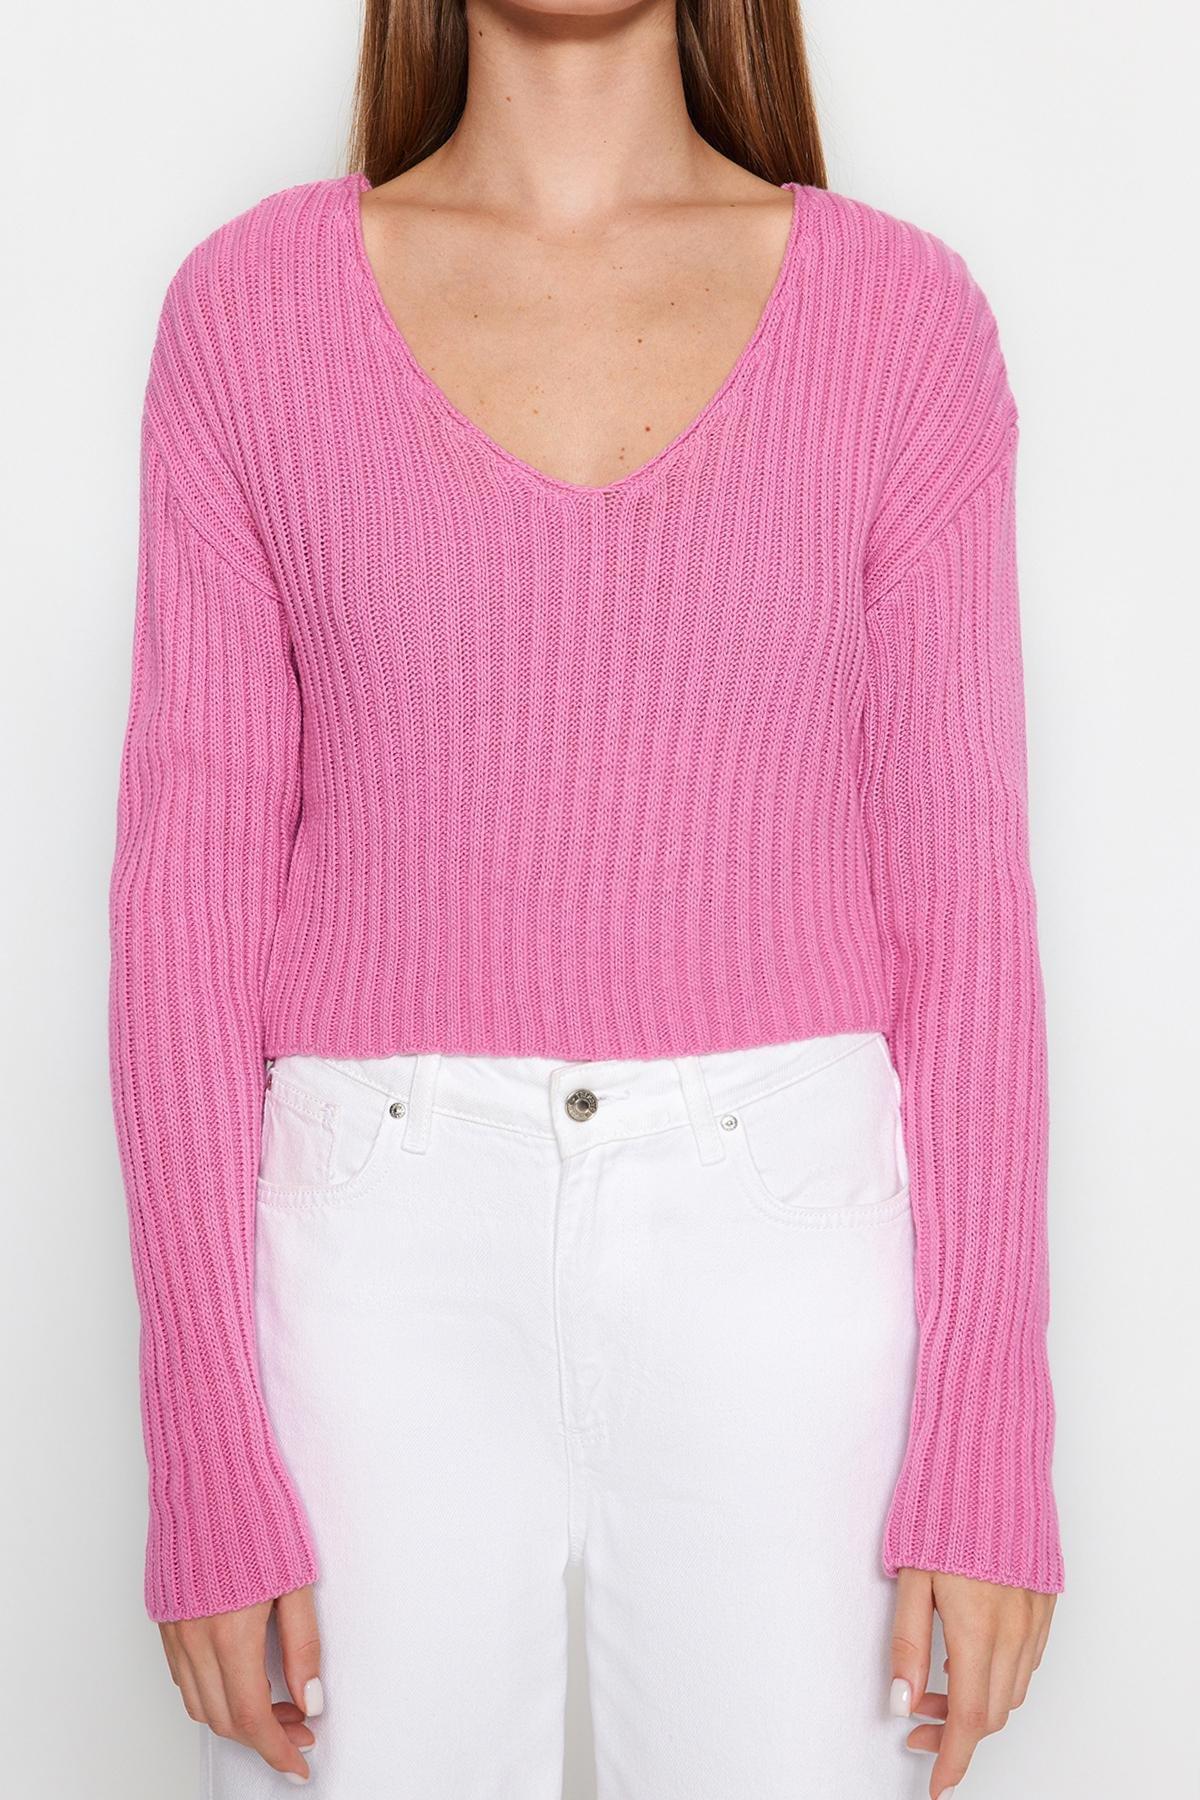 Trendyol - Pink V-Neck Cropped Knitted Sweater